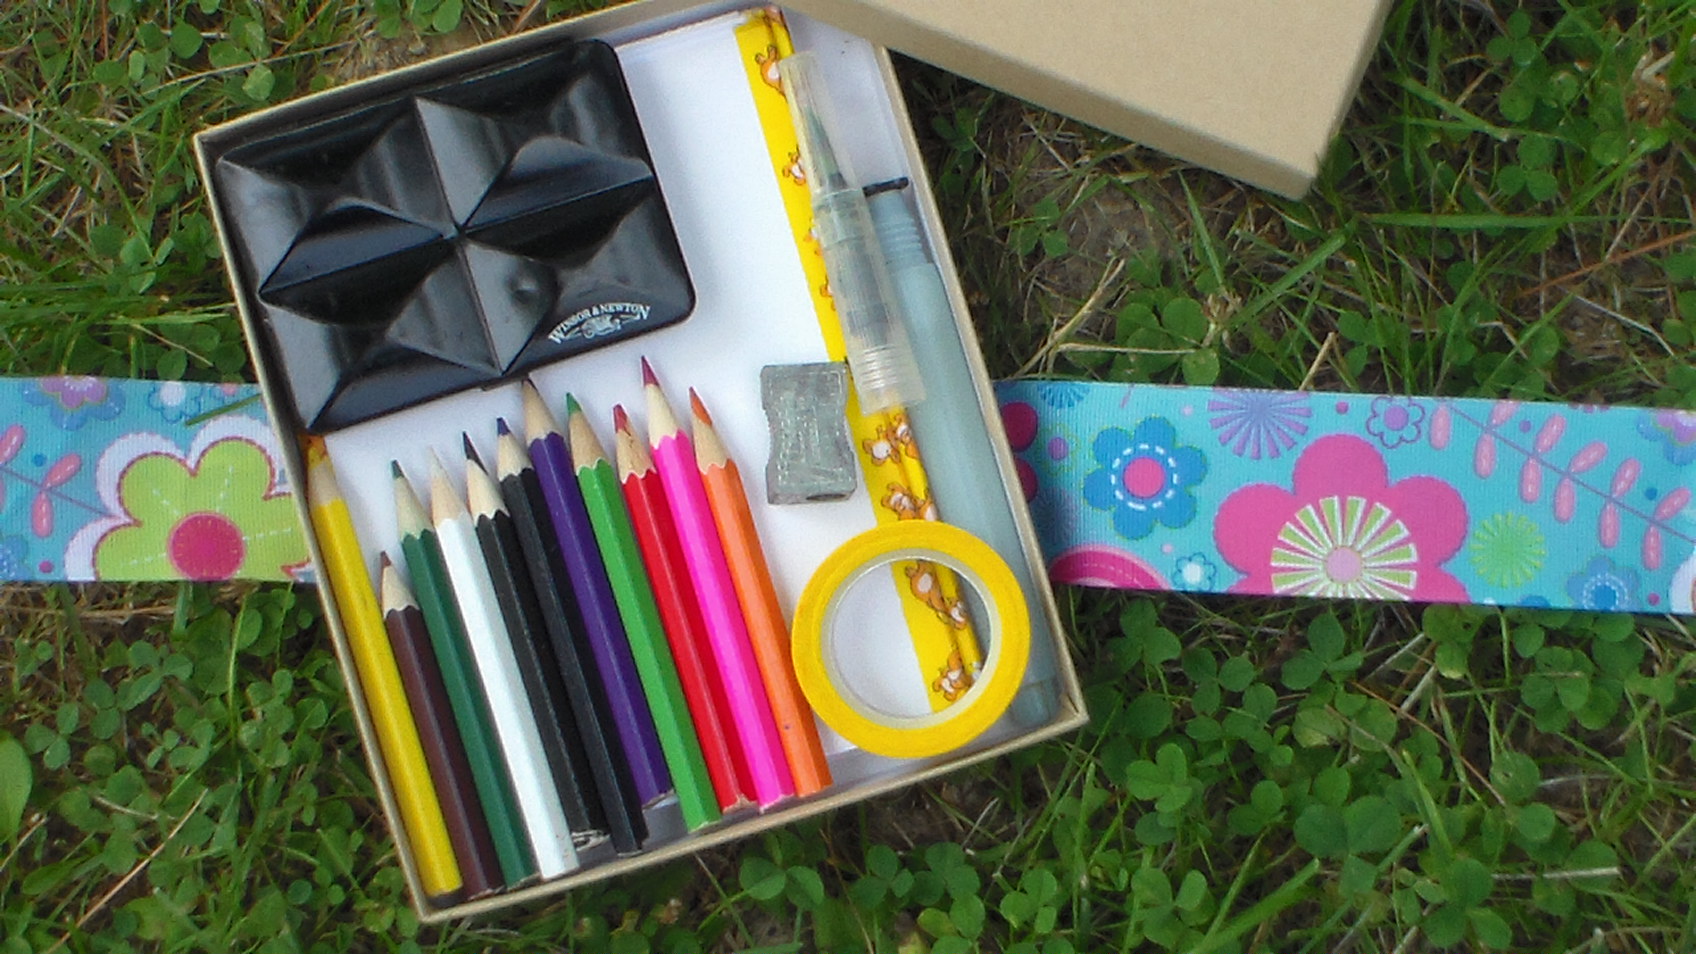 How to Make a Travel Art Kit for Kids